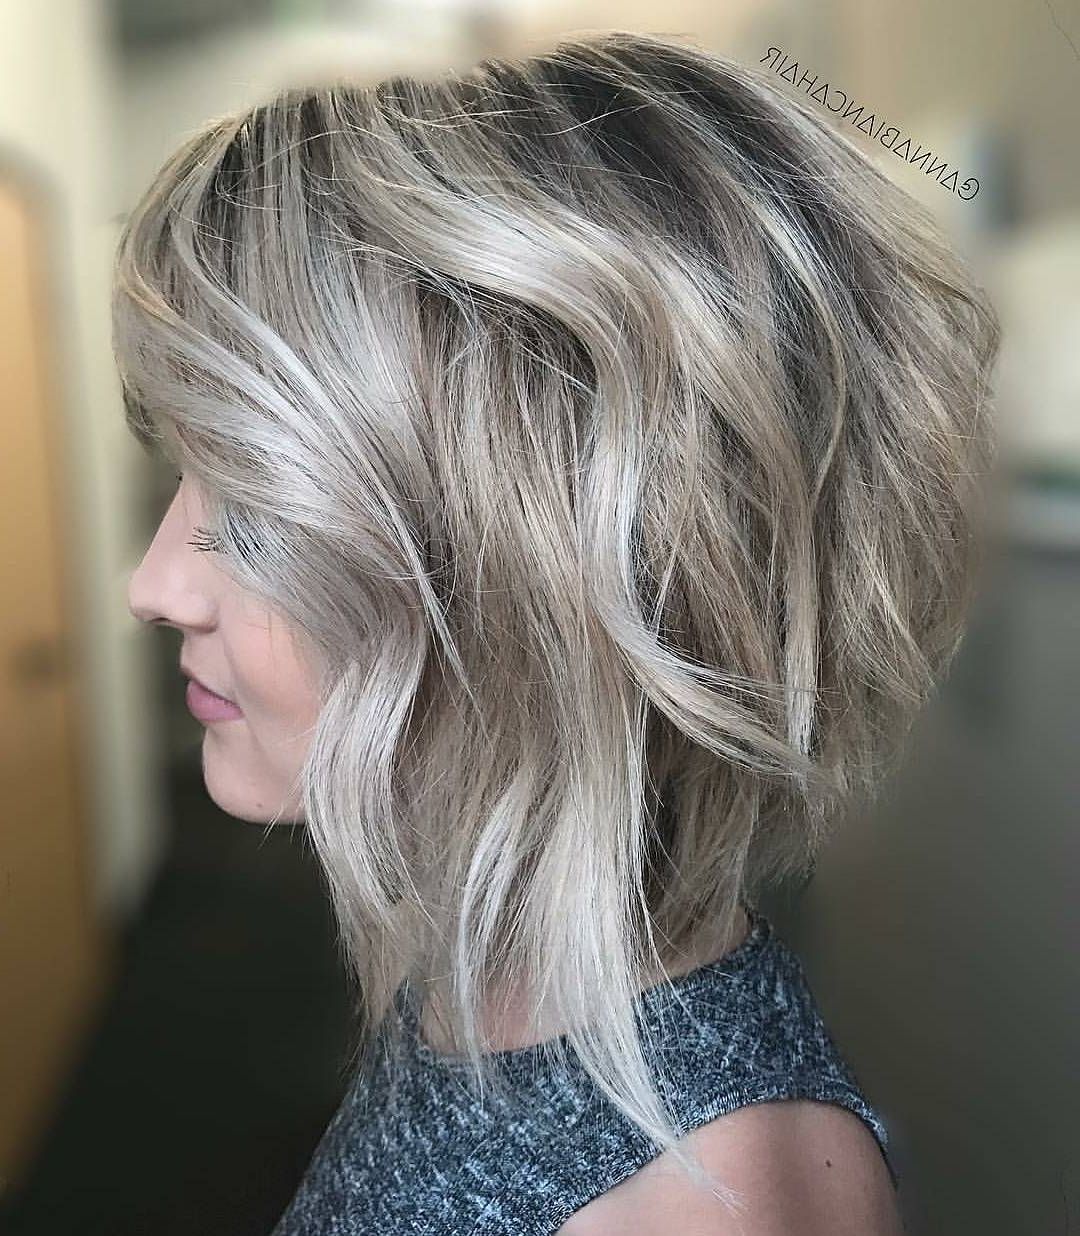 10 Stylish Medium Bob Haircuts For Women – Easy Care Chic Bob Hair 2019 For Classy Slanted Blonde Bob Hairstyles (View 15 of 20)